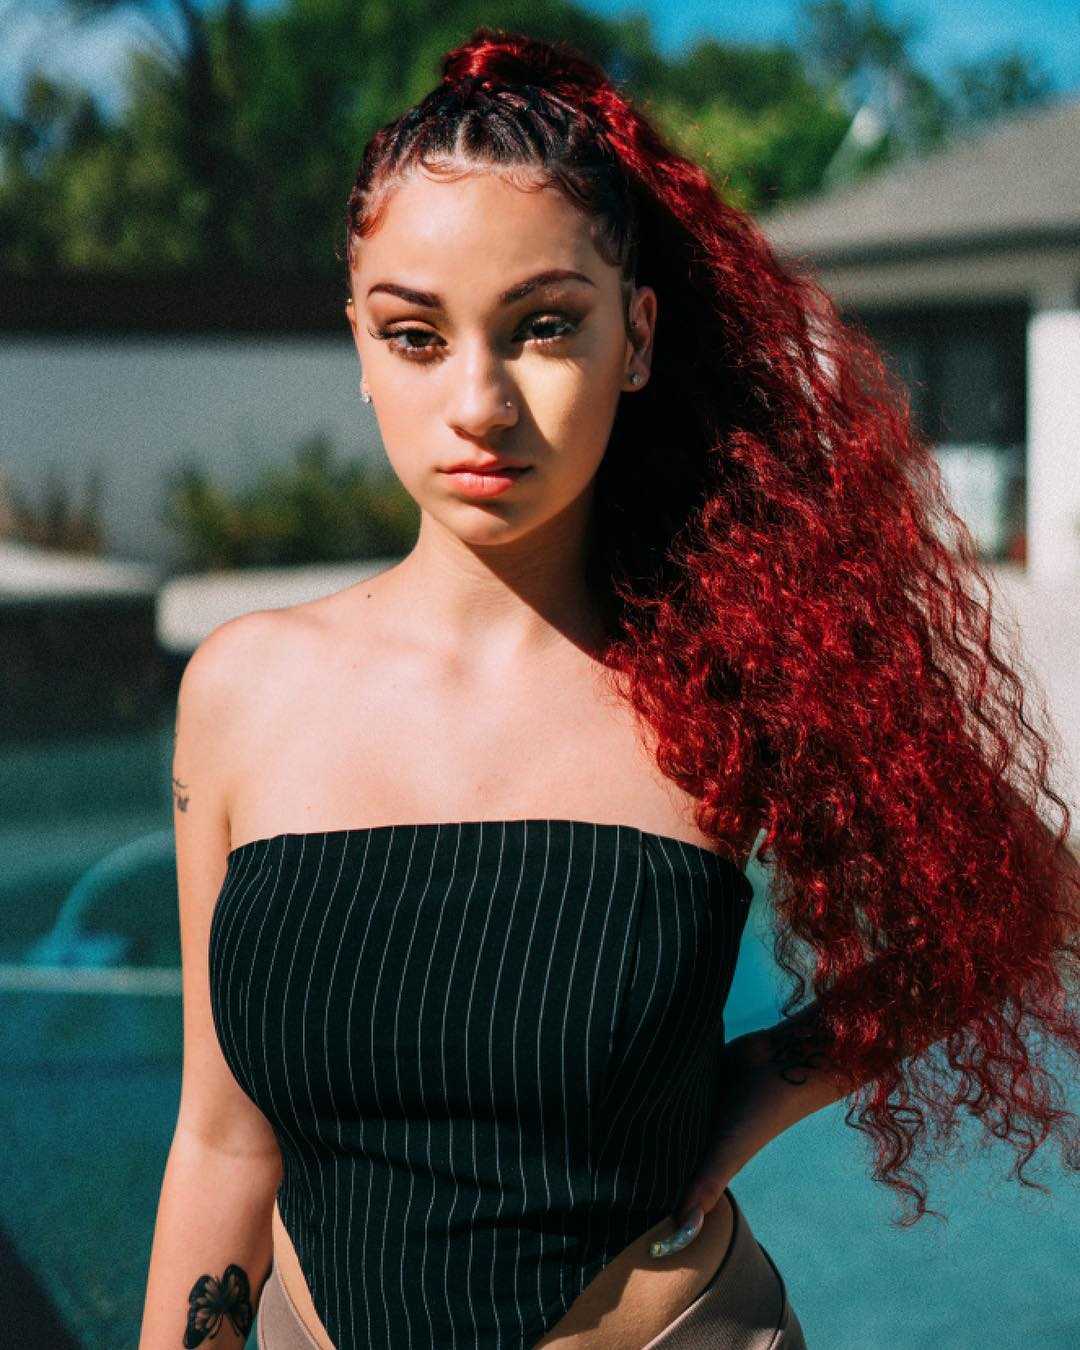 70+ Hot Pictures Of Danielle Bregoli aka Bhad Bhabie Which Will Win Your Heart 27